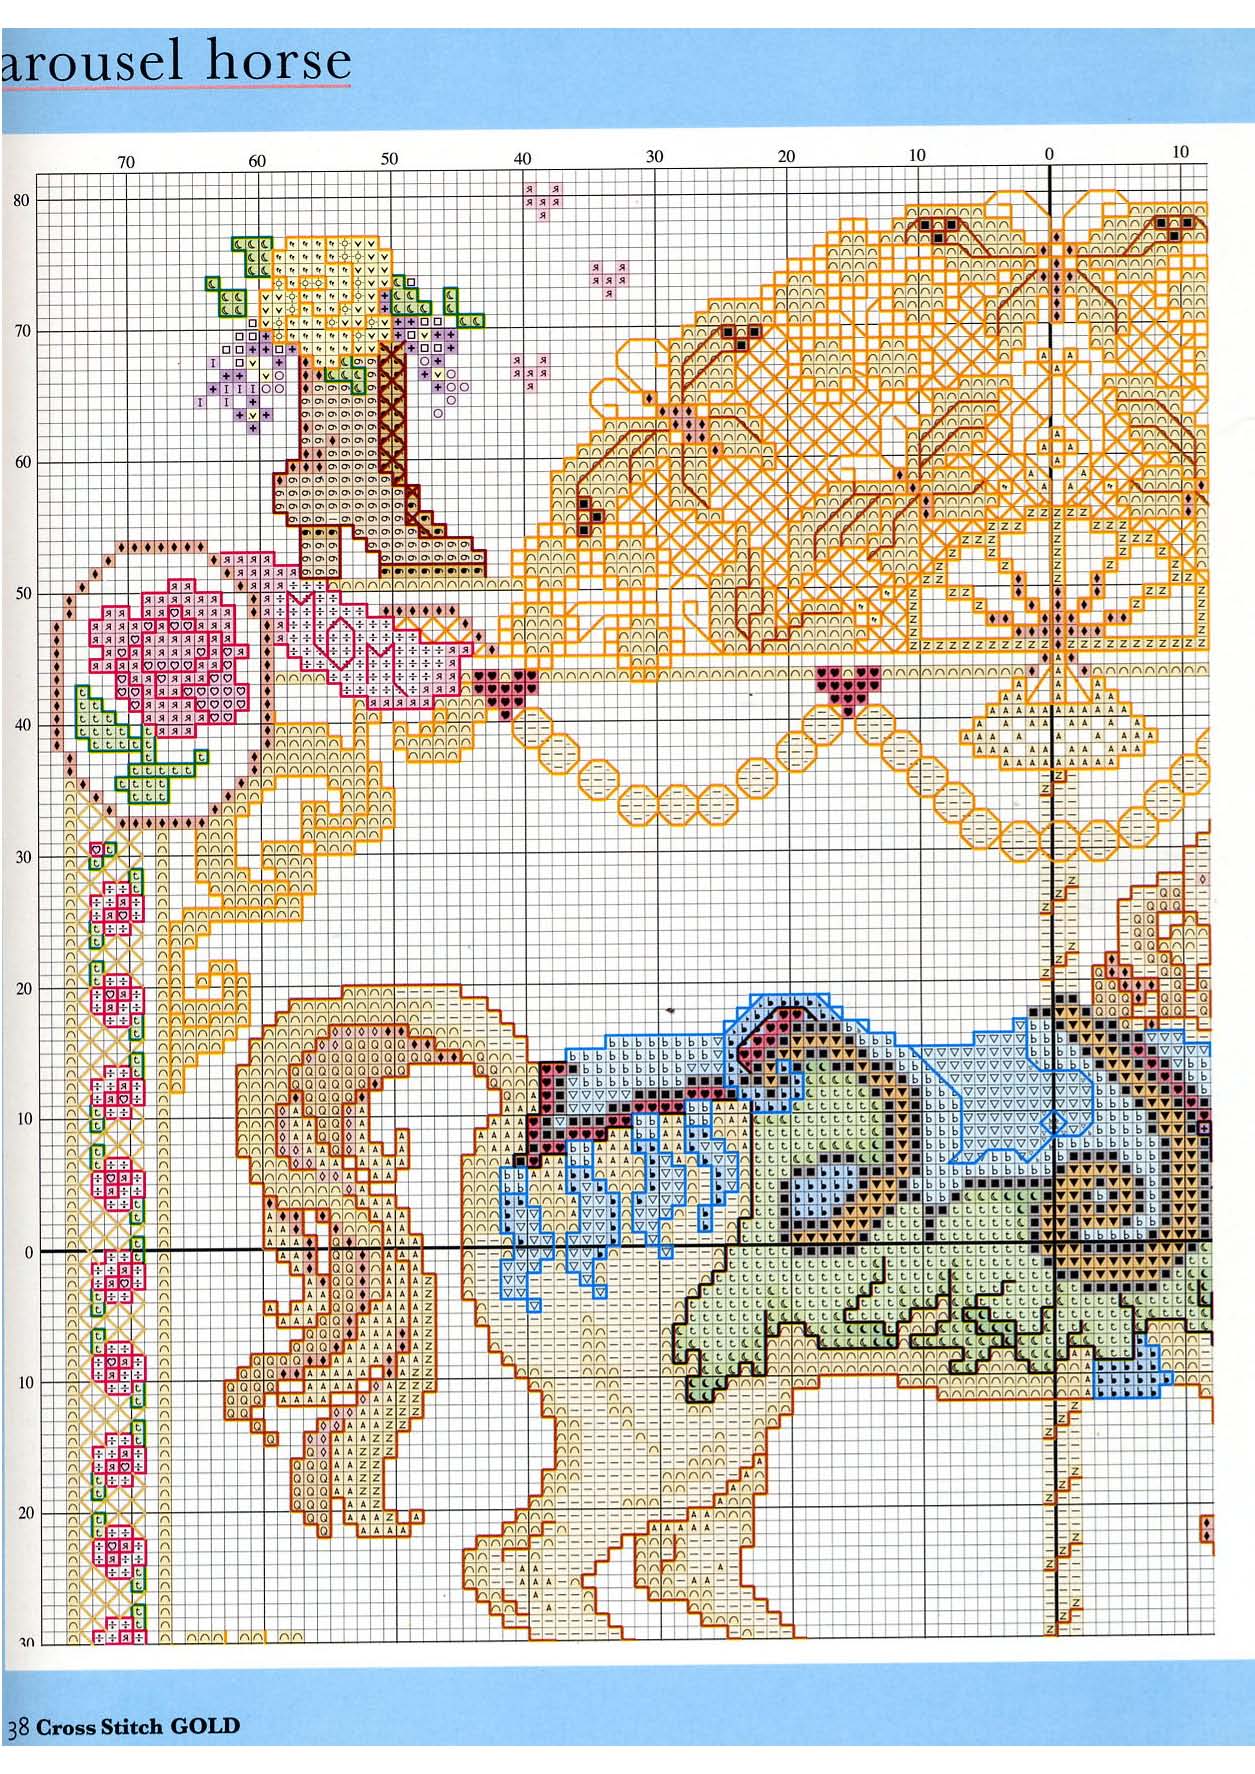 Carousel with horses cross stitch pattern (3)